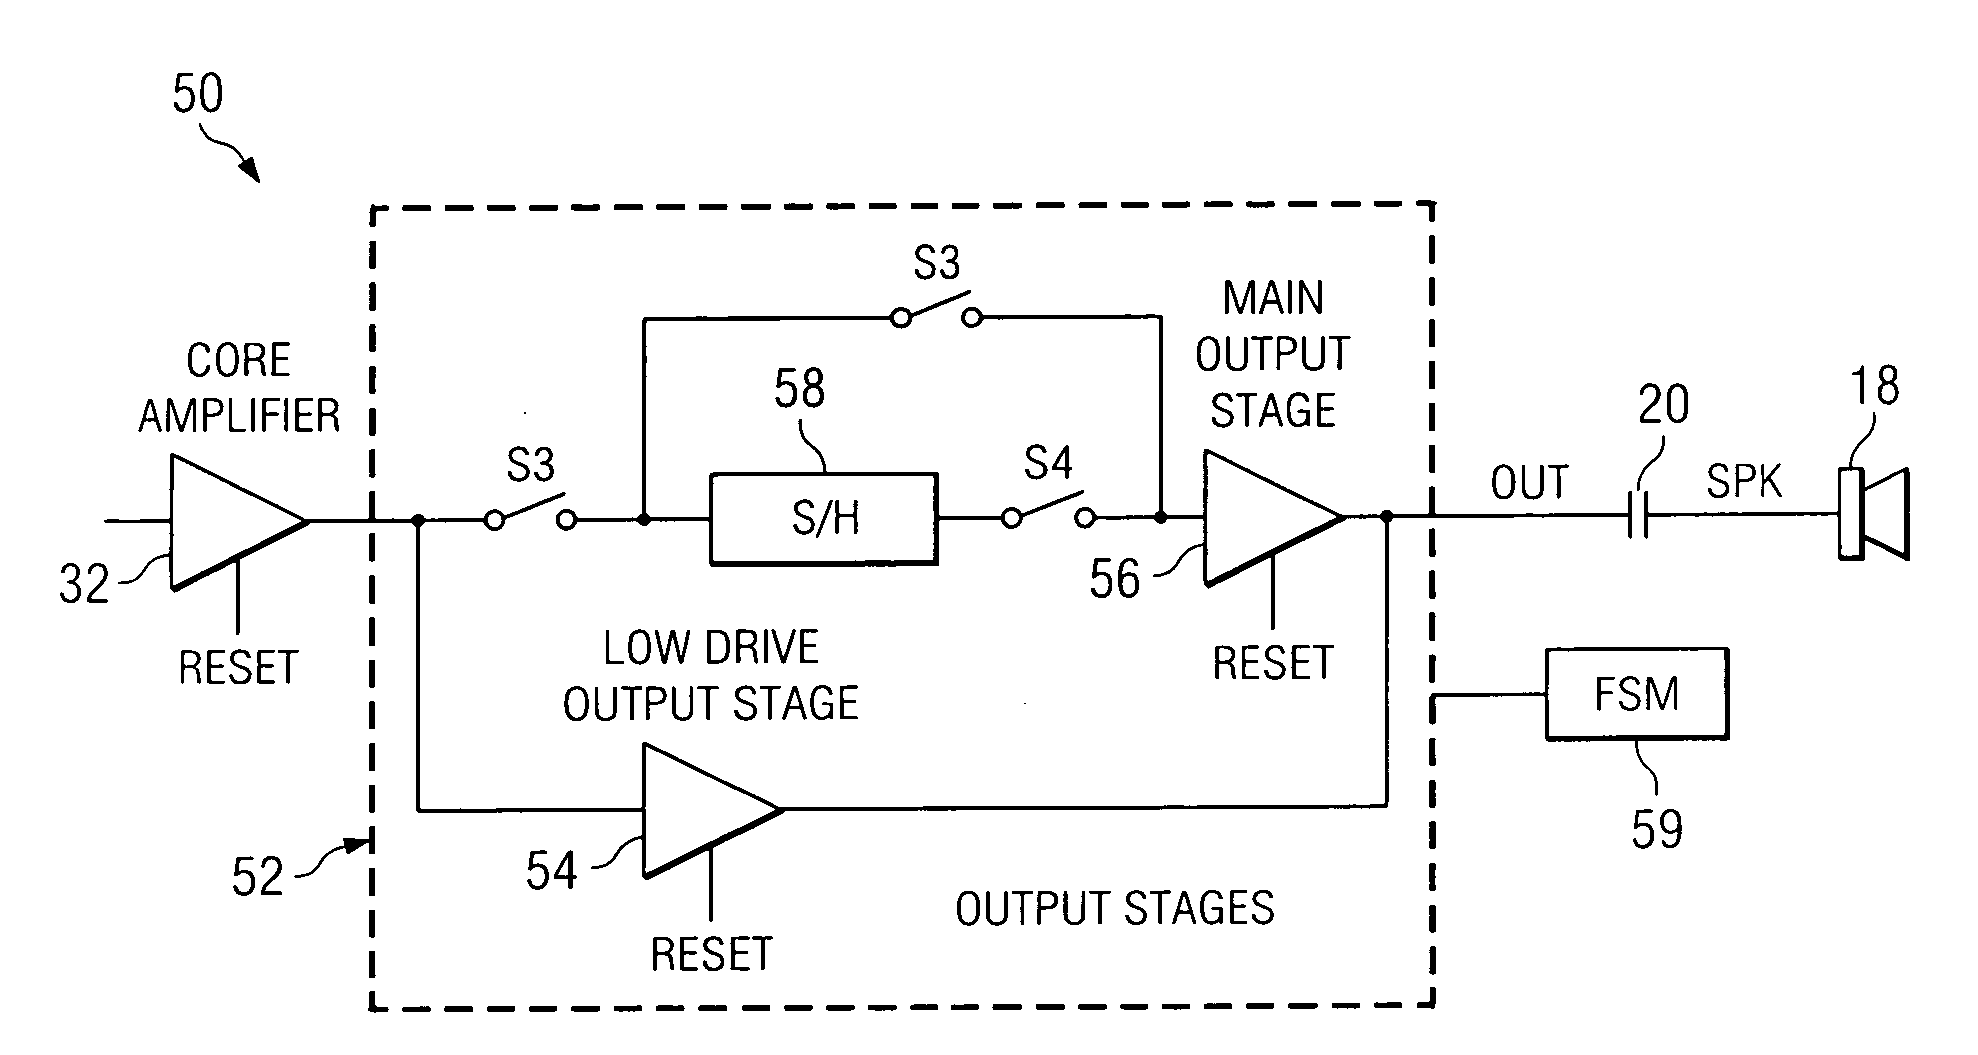 Multi-stage amplifiers to reduce pop noise